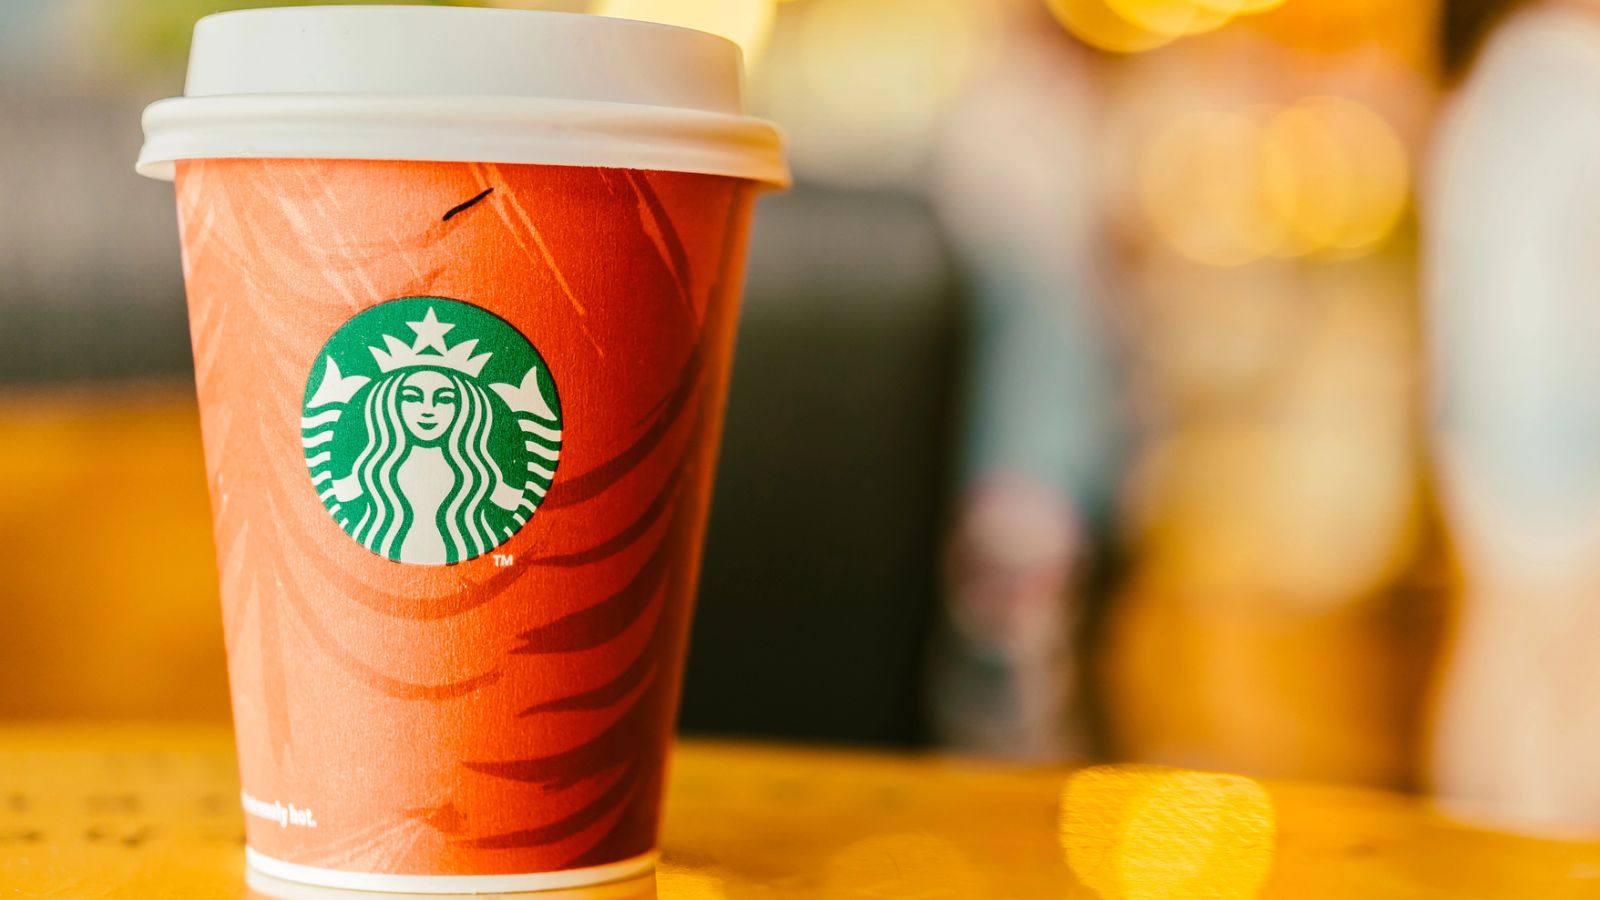 12 Things You Should Never Buy In Starbucks